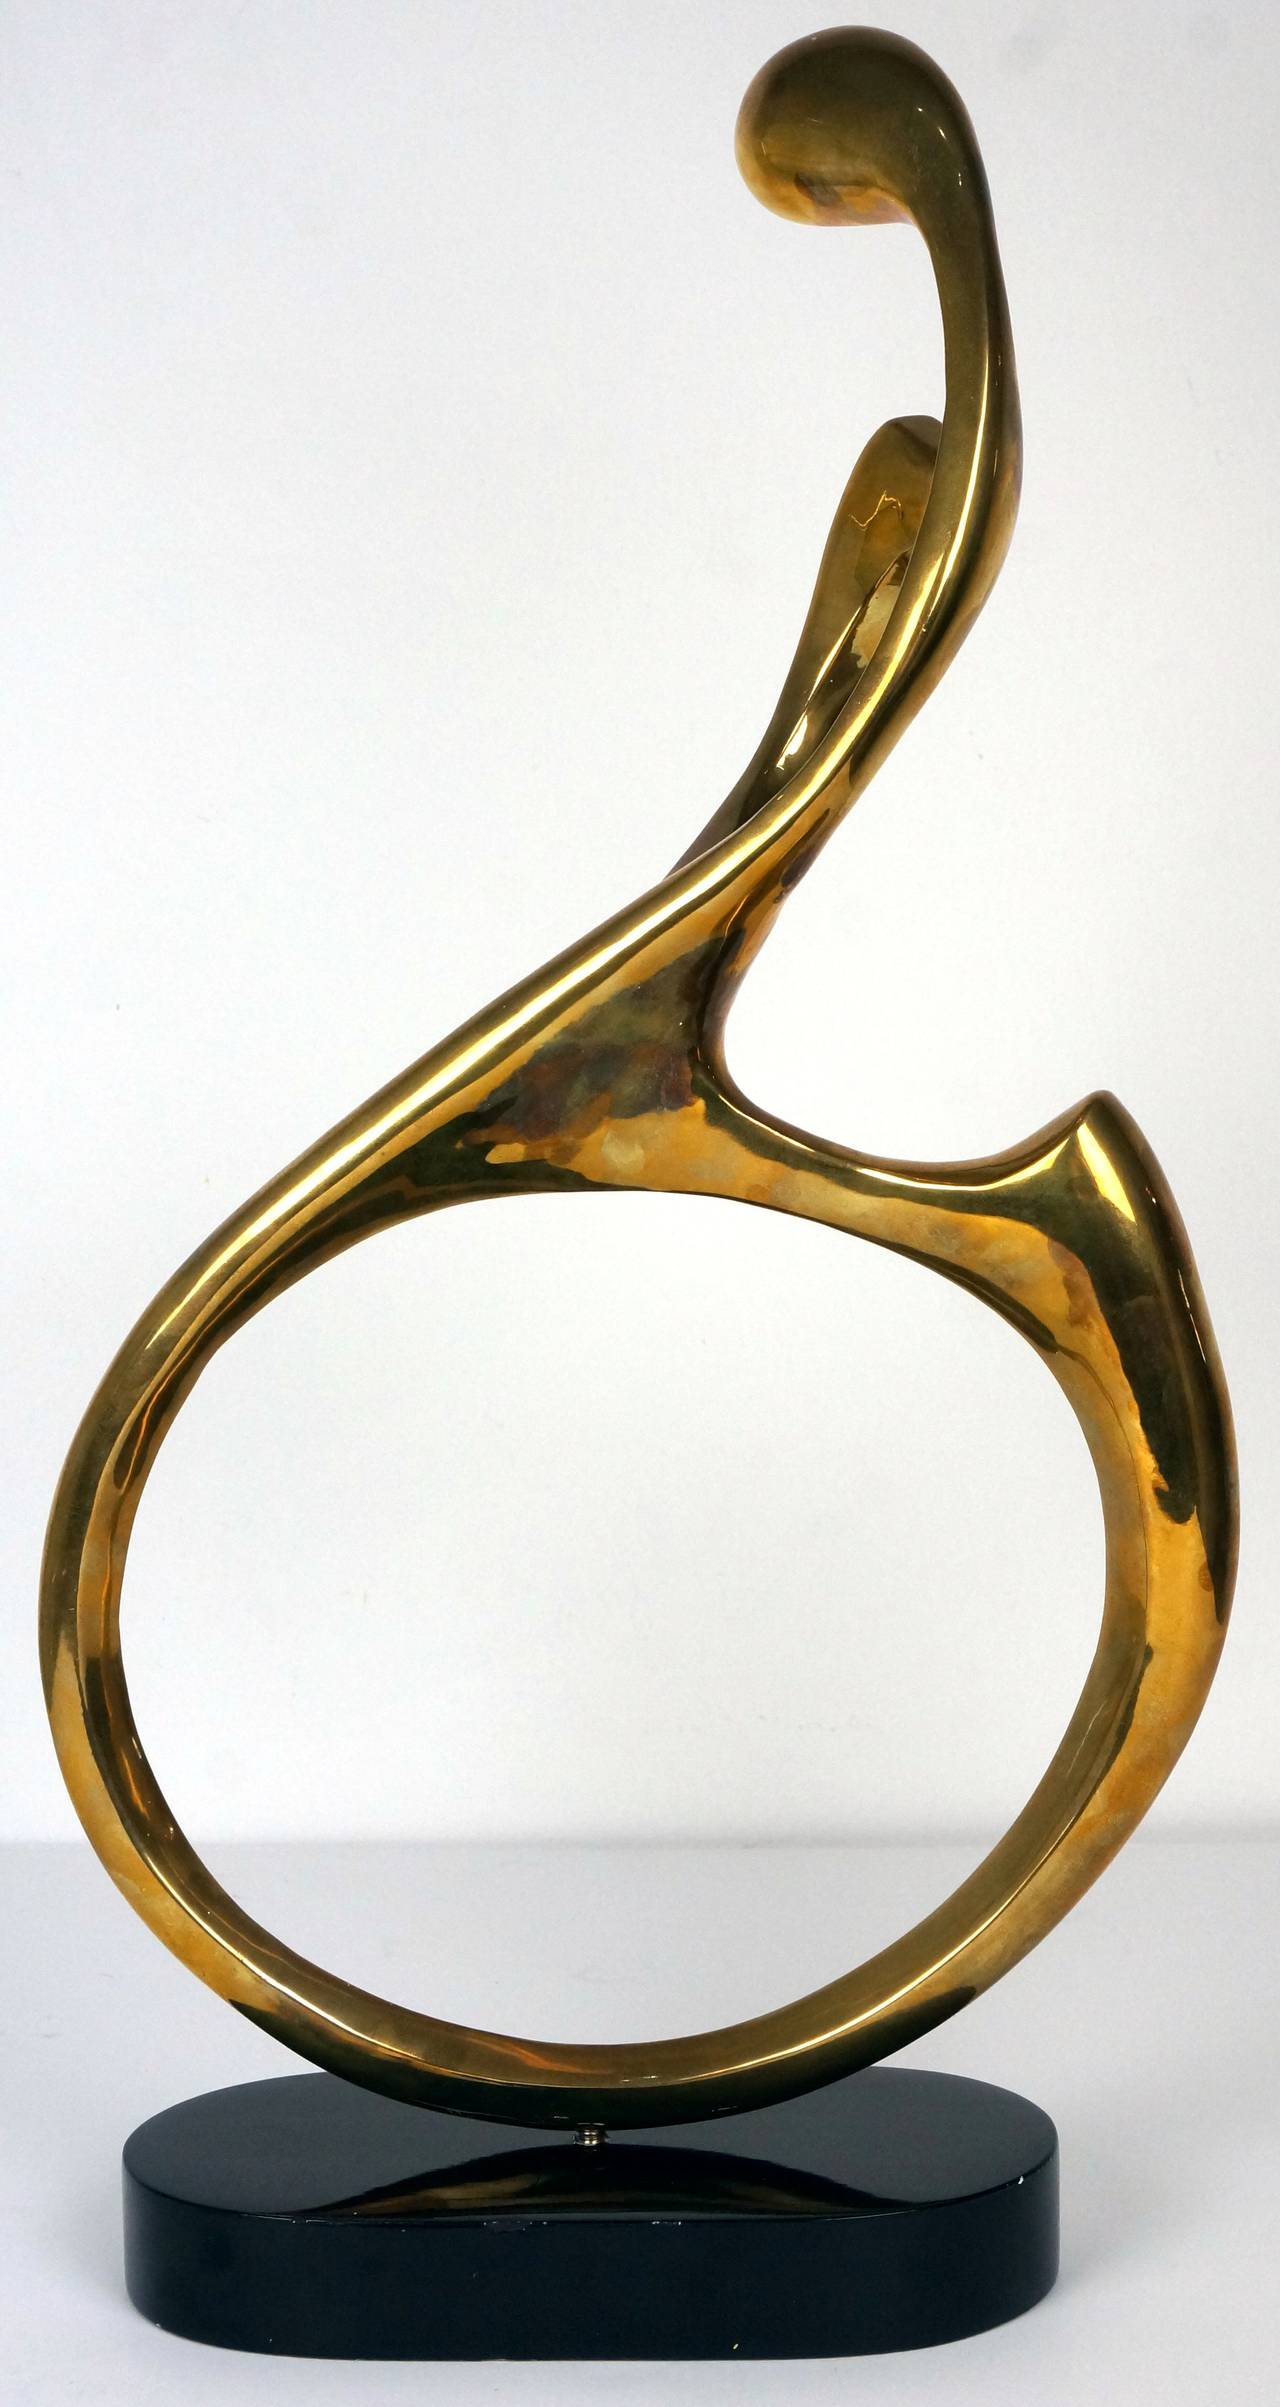 This bronze sculpture from Surawongse, Thailand, was sand-cast and hand polished to achieve its amazing form and finish.

The piece depicts the female form in a biomorphic fluidity which evokes a sensuality and gracefulness. 

The piece has an